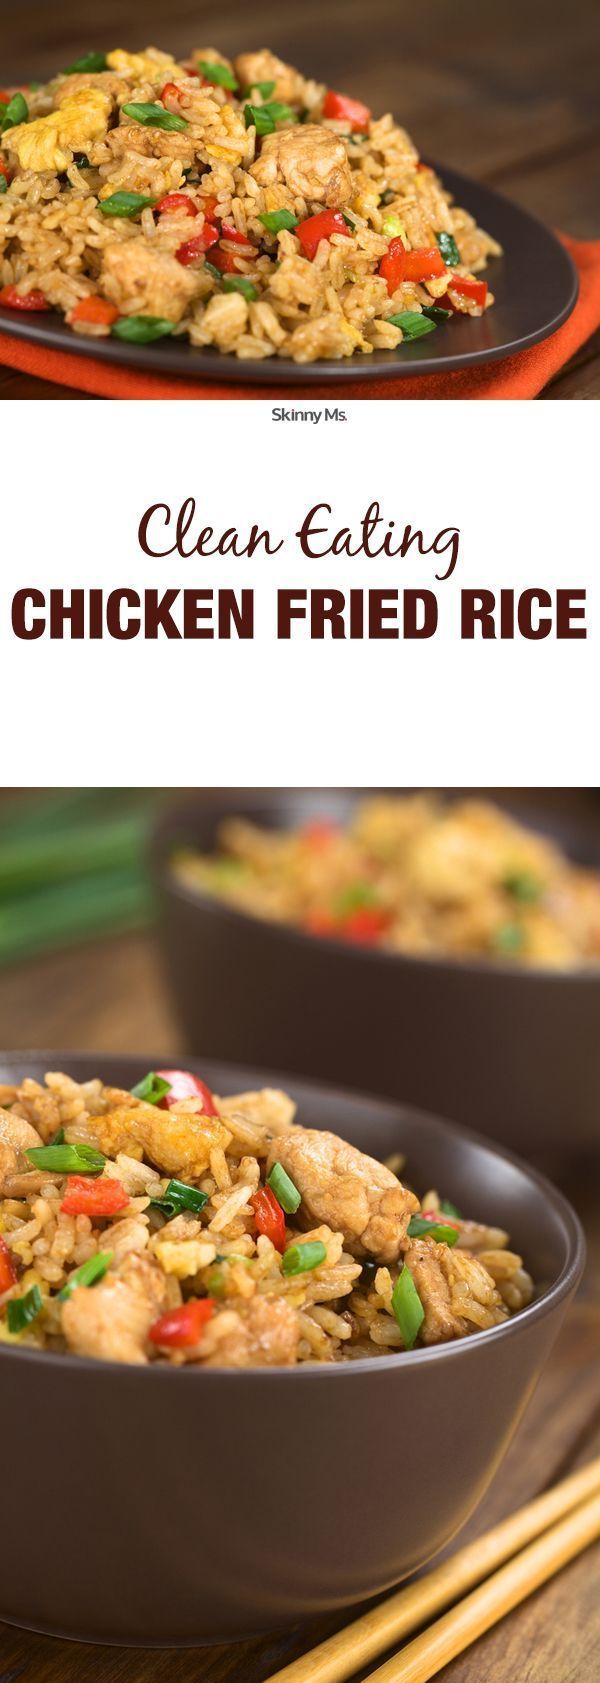 Clean Eating Chicken Fried Rice saves you all the calories from take out.